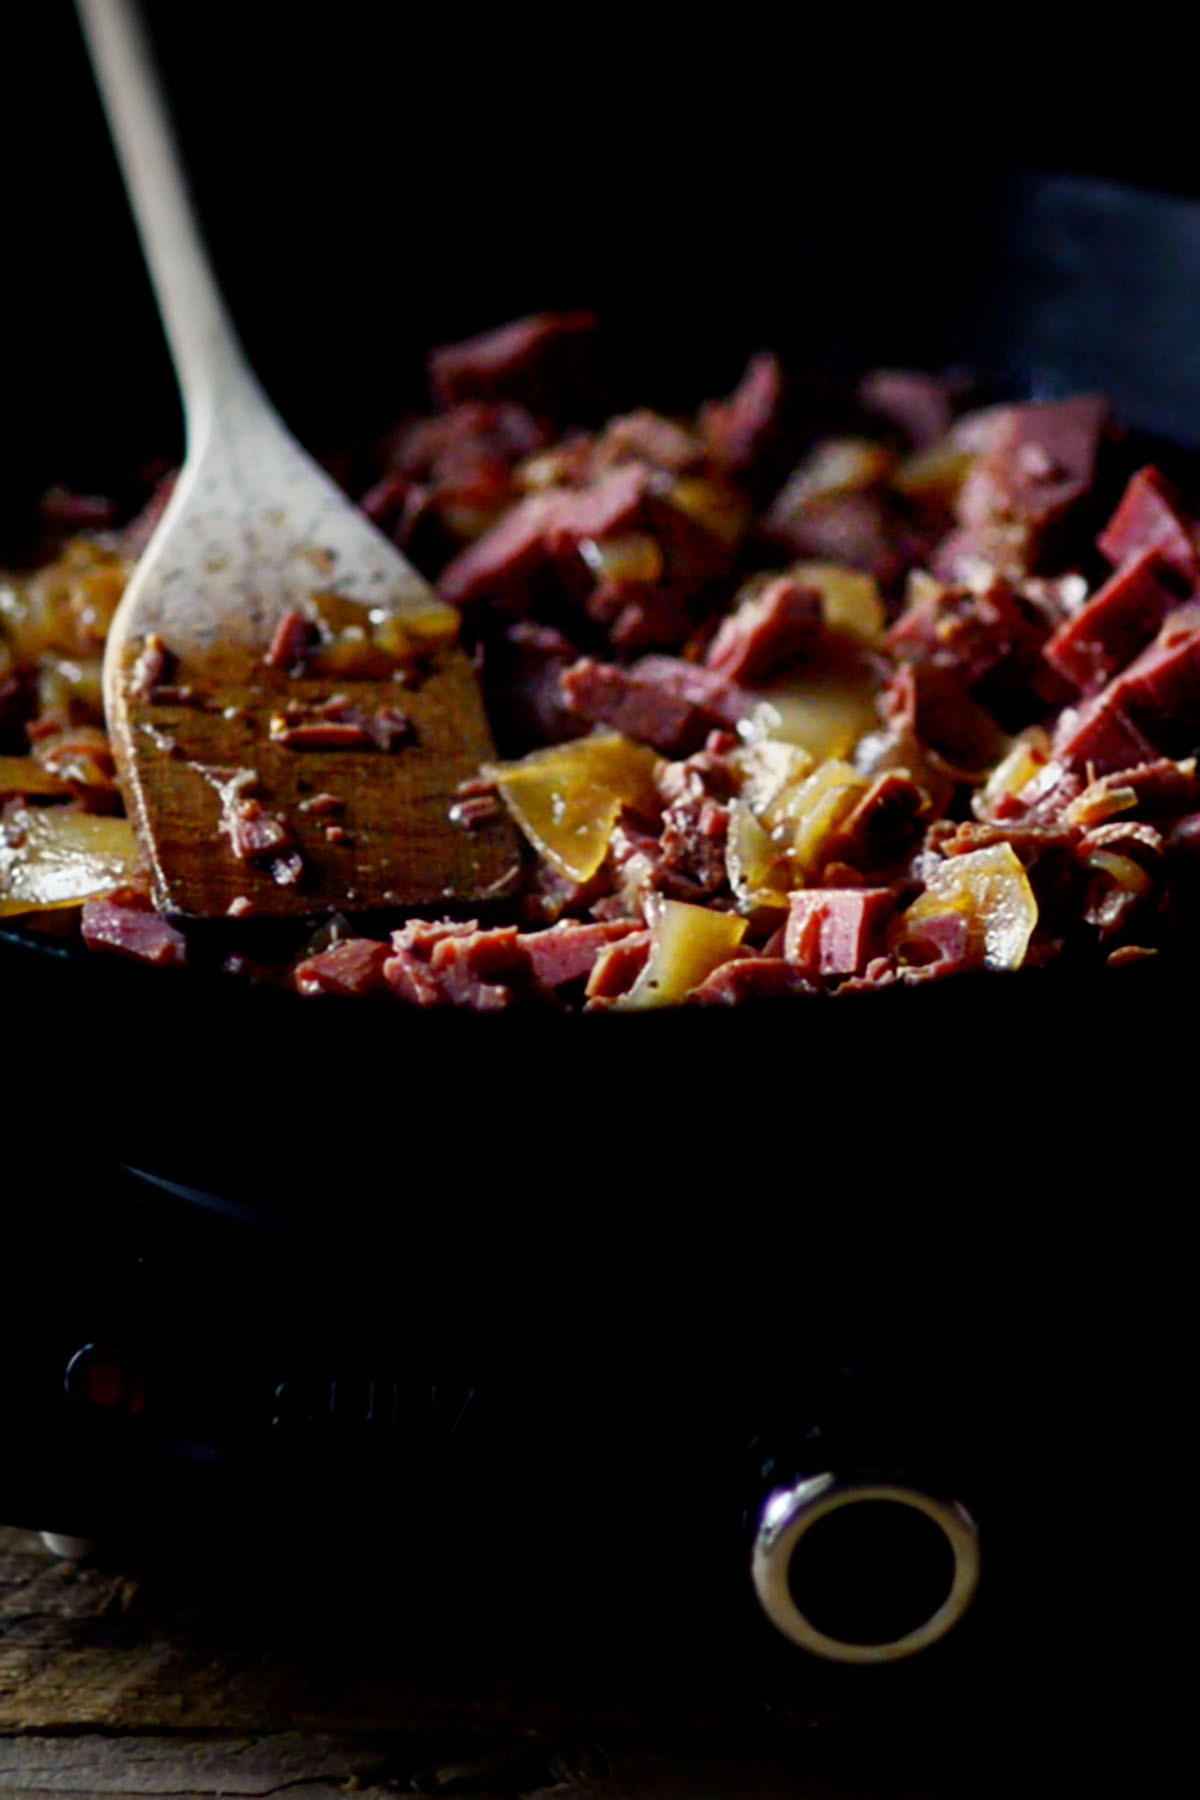 Cooked corned beef brisket and onions searing in a cast iron skillet.